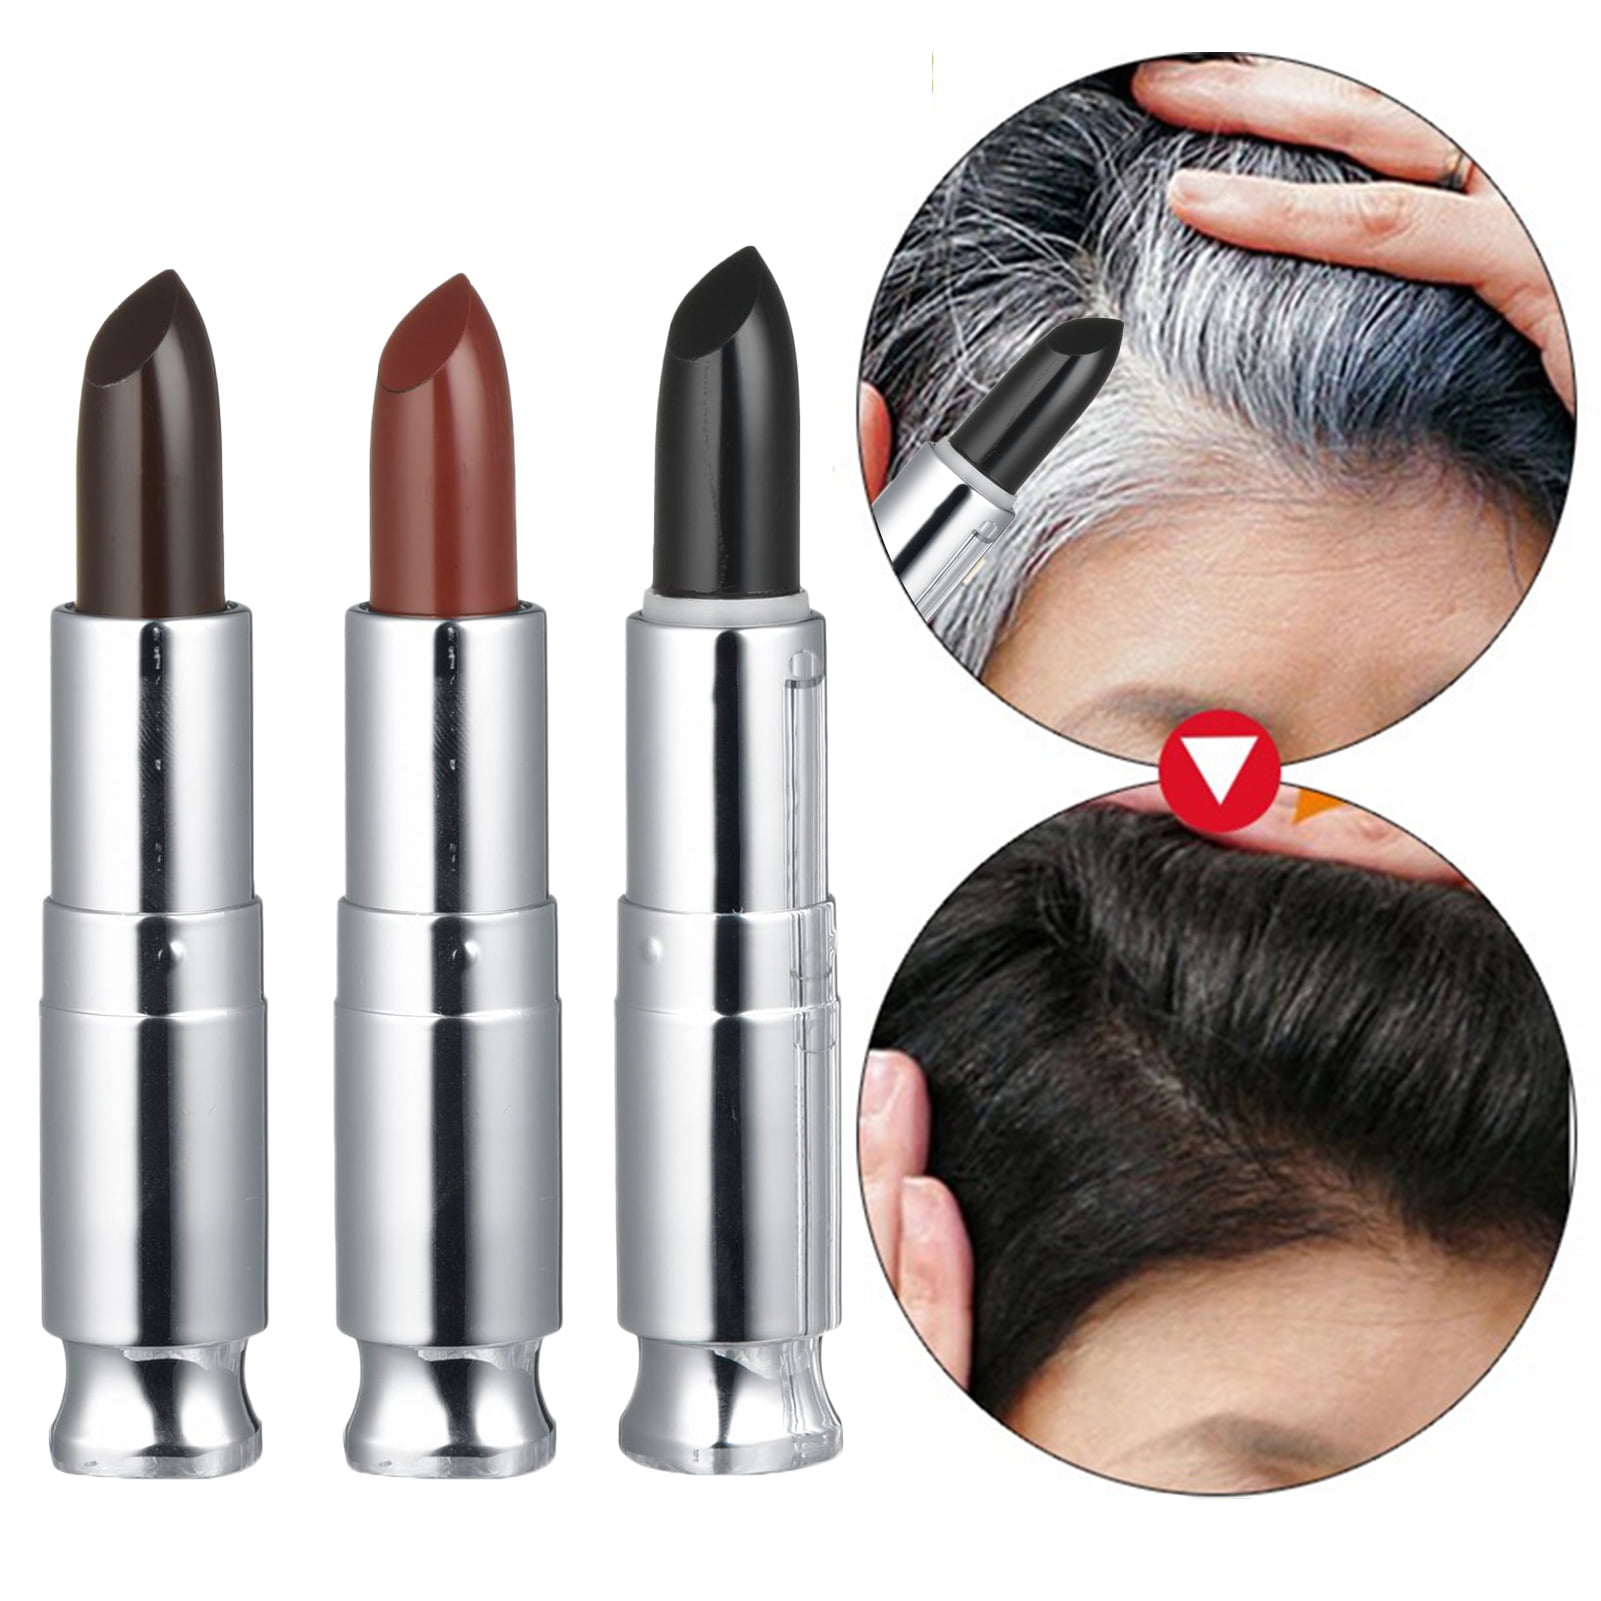 qianli 4g Hair Coloring Pen Covering Gray Hair Lipstick Shape Fast Staining  Real-hair Finish One Time Hair Dye Instant Color Stick for Home Use -  